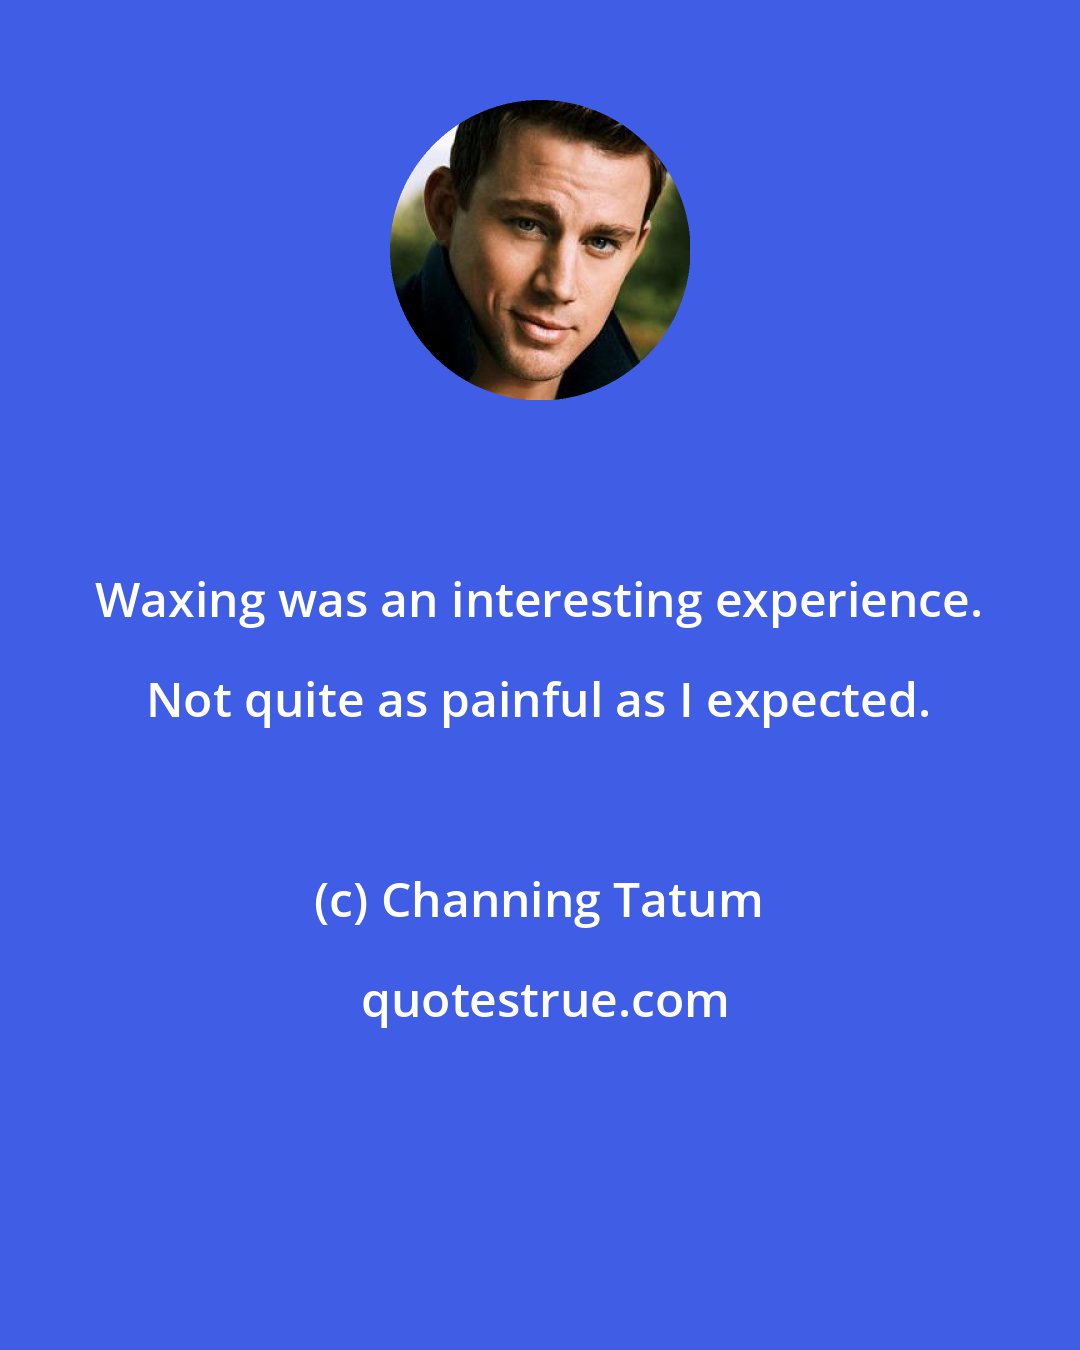 Channing Tatum: Waxing was an interesting experience. Not quite as painful as I expected.